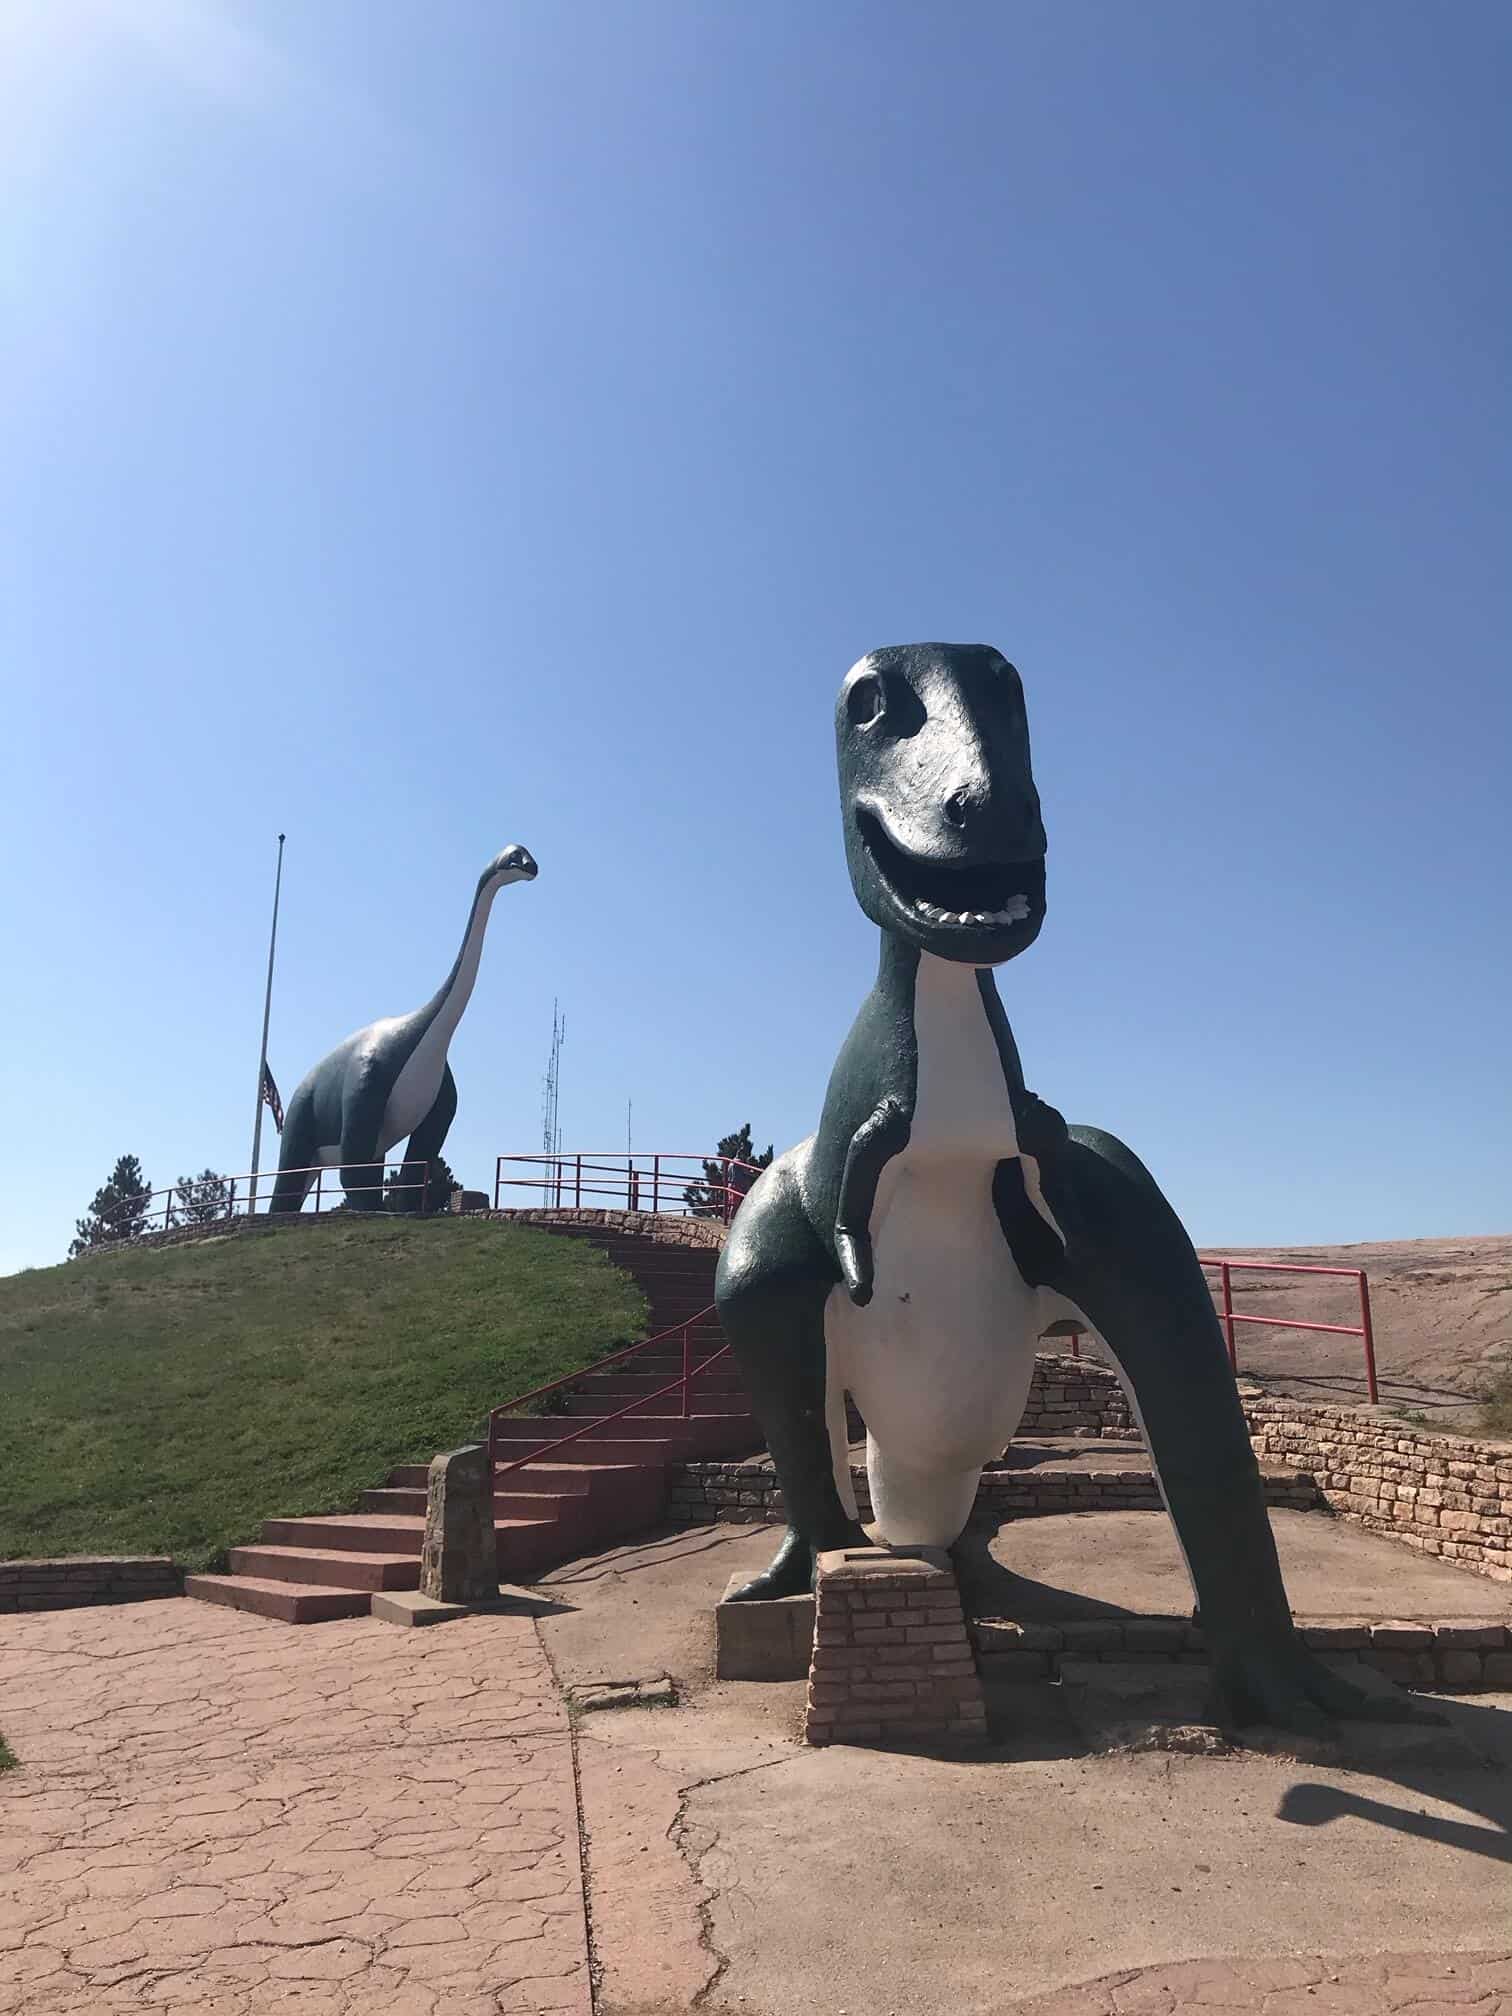 A visit to Dinosaur Park for your south dakota vacation itinerary